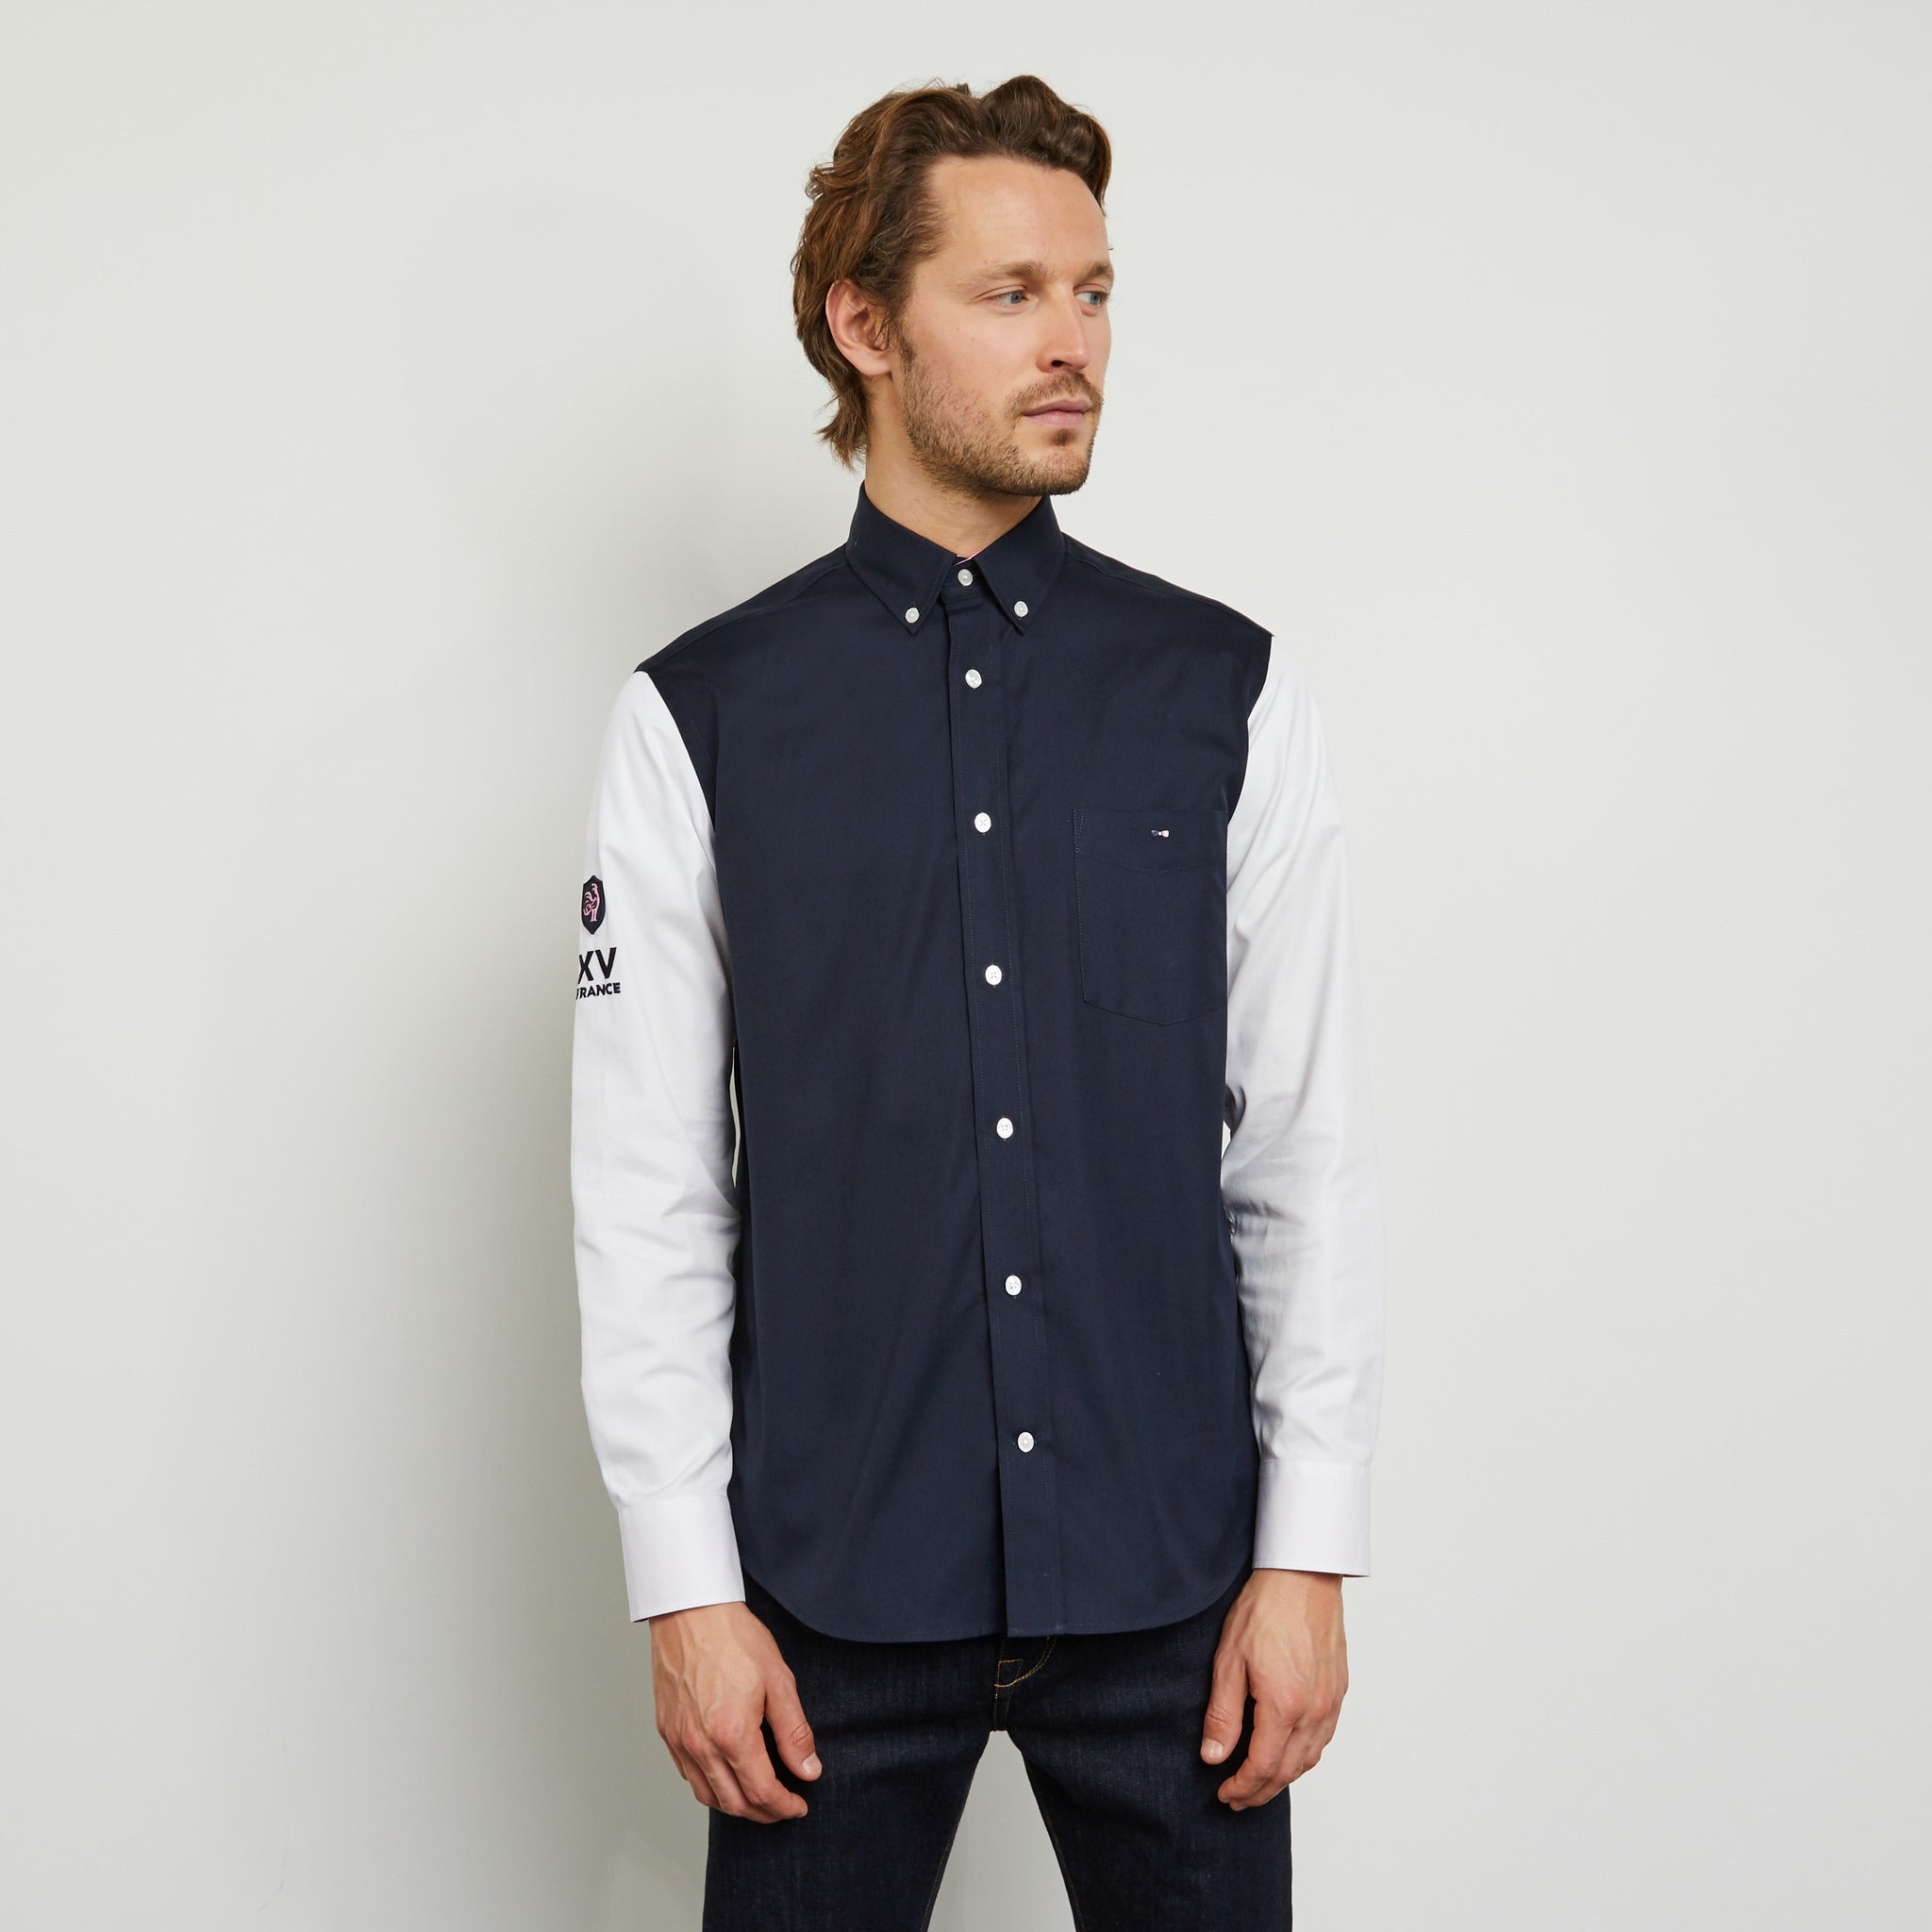 Colour-Block Shirt With Embroidered France Xv